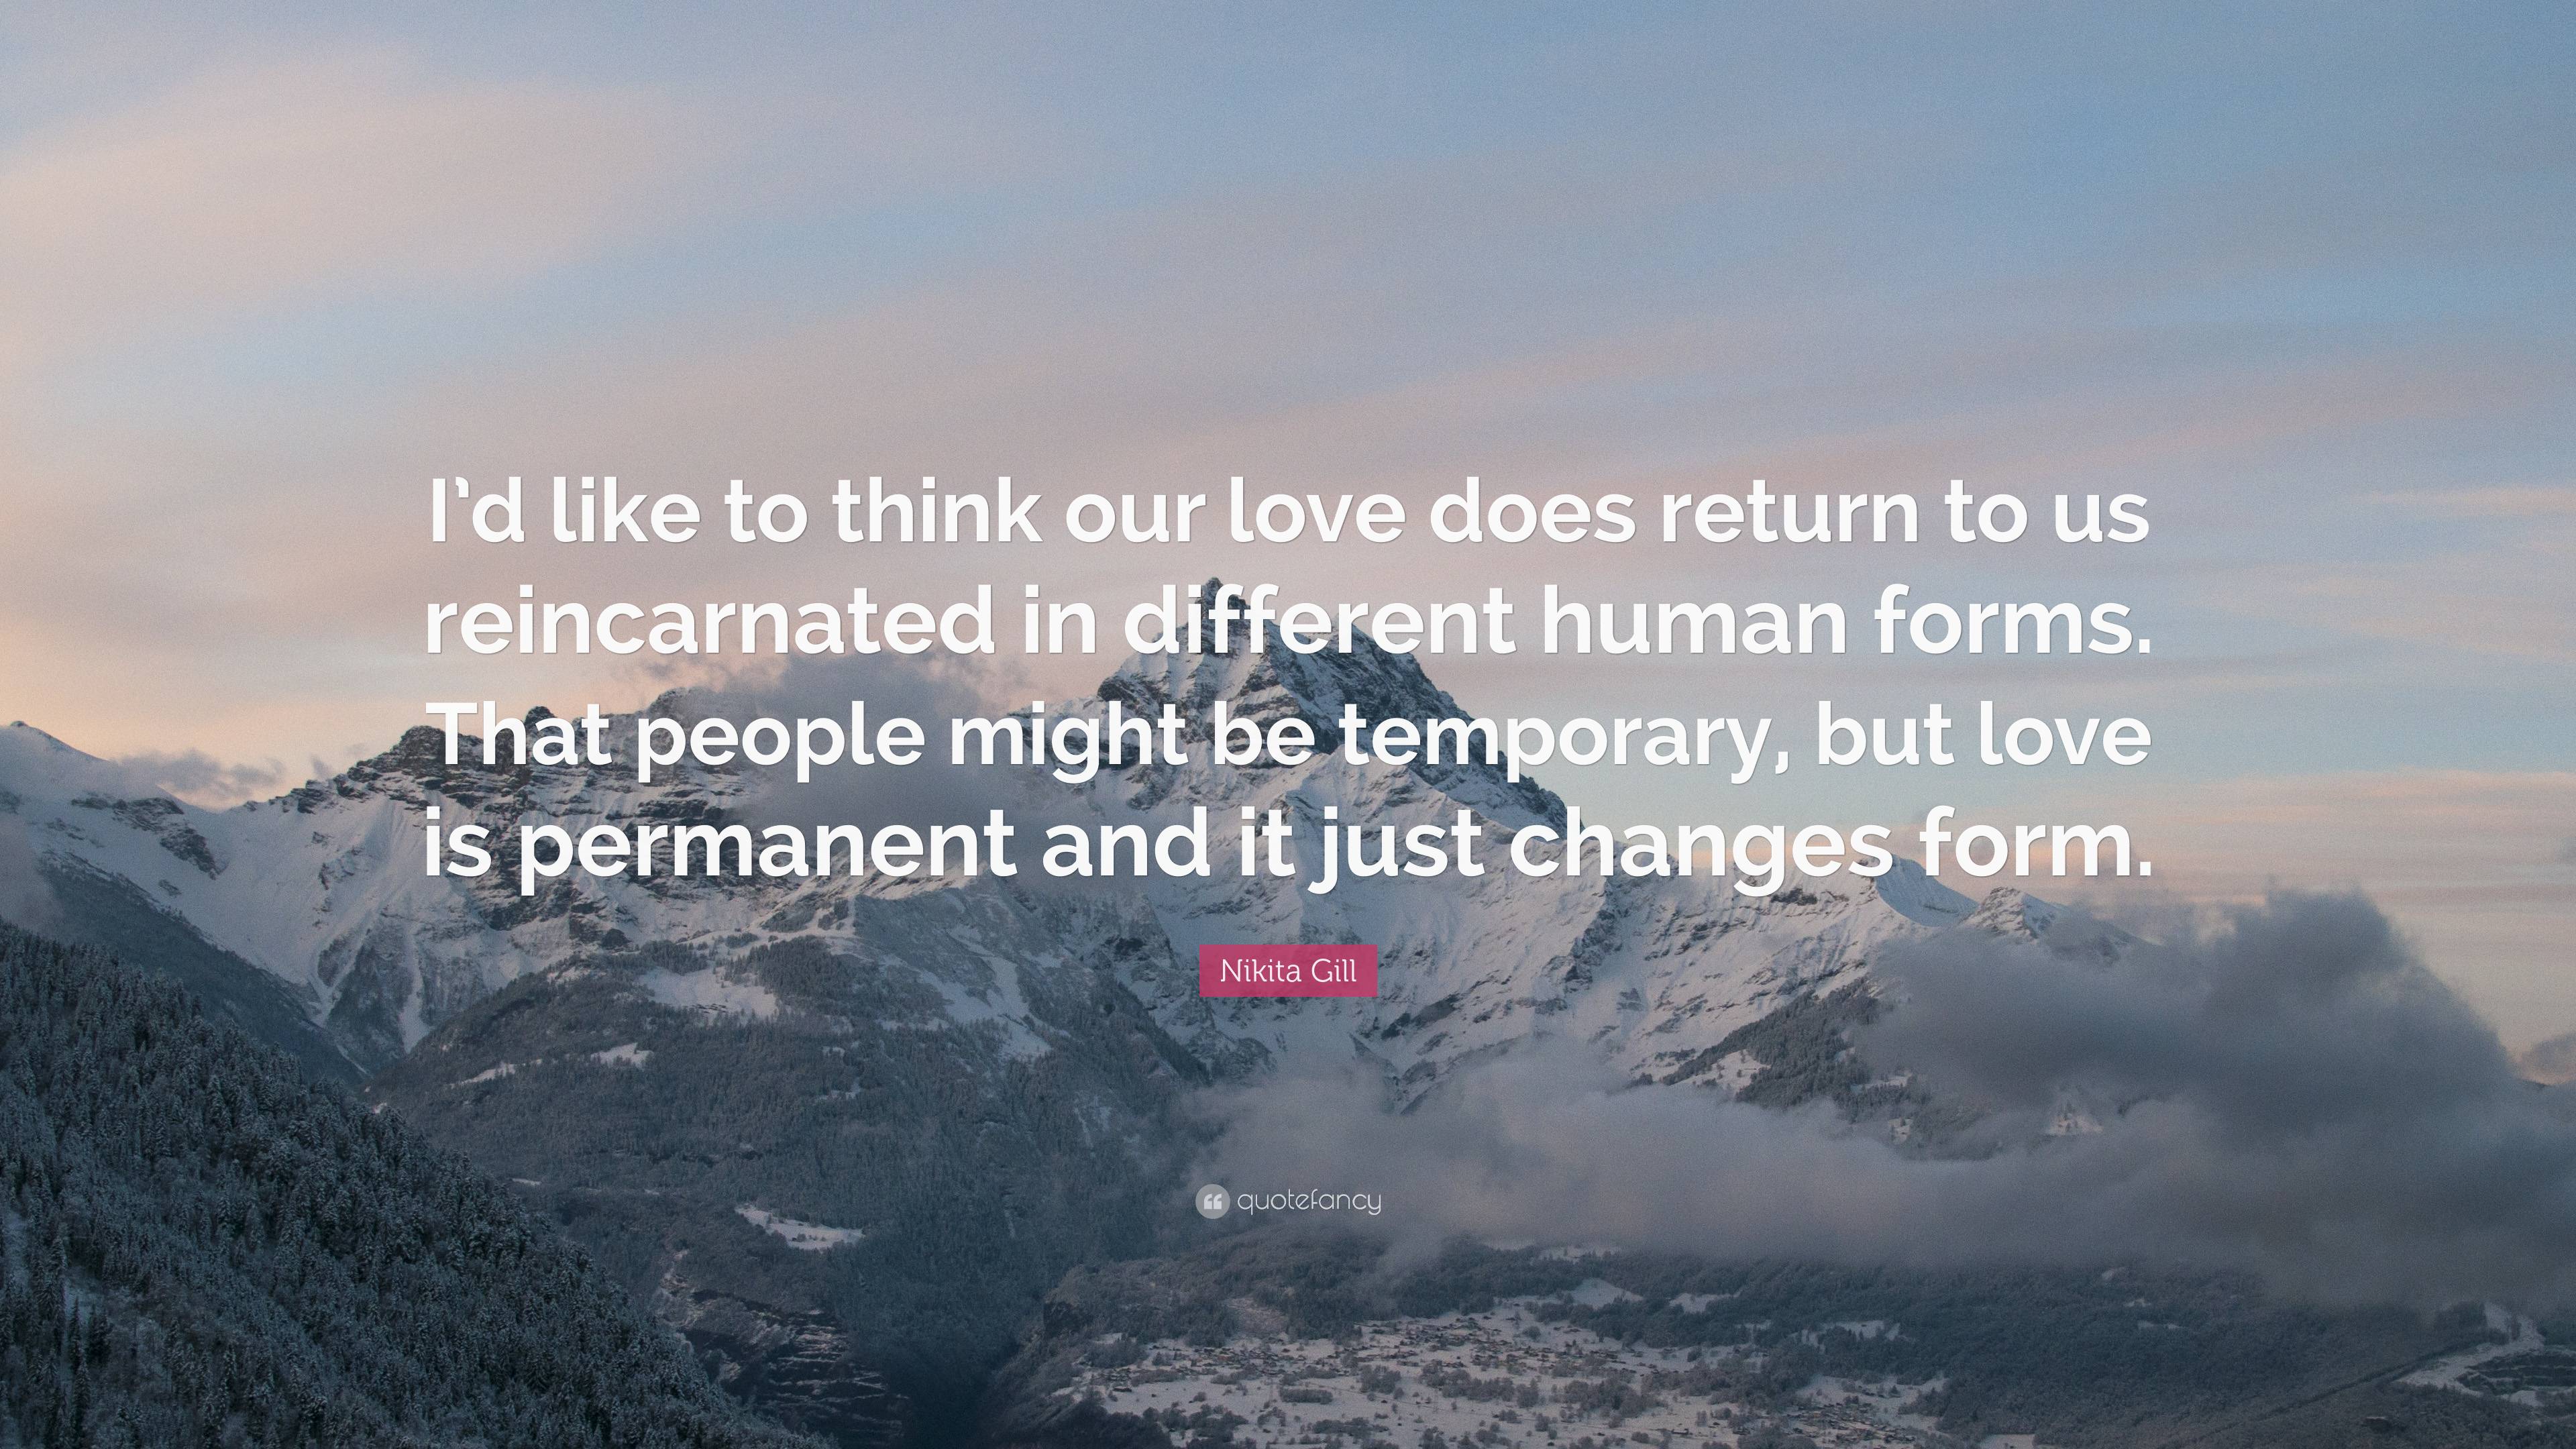 Nikita Gill Quote: “I’d like to think our love does return to us ...